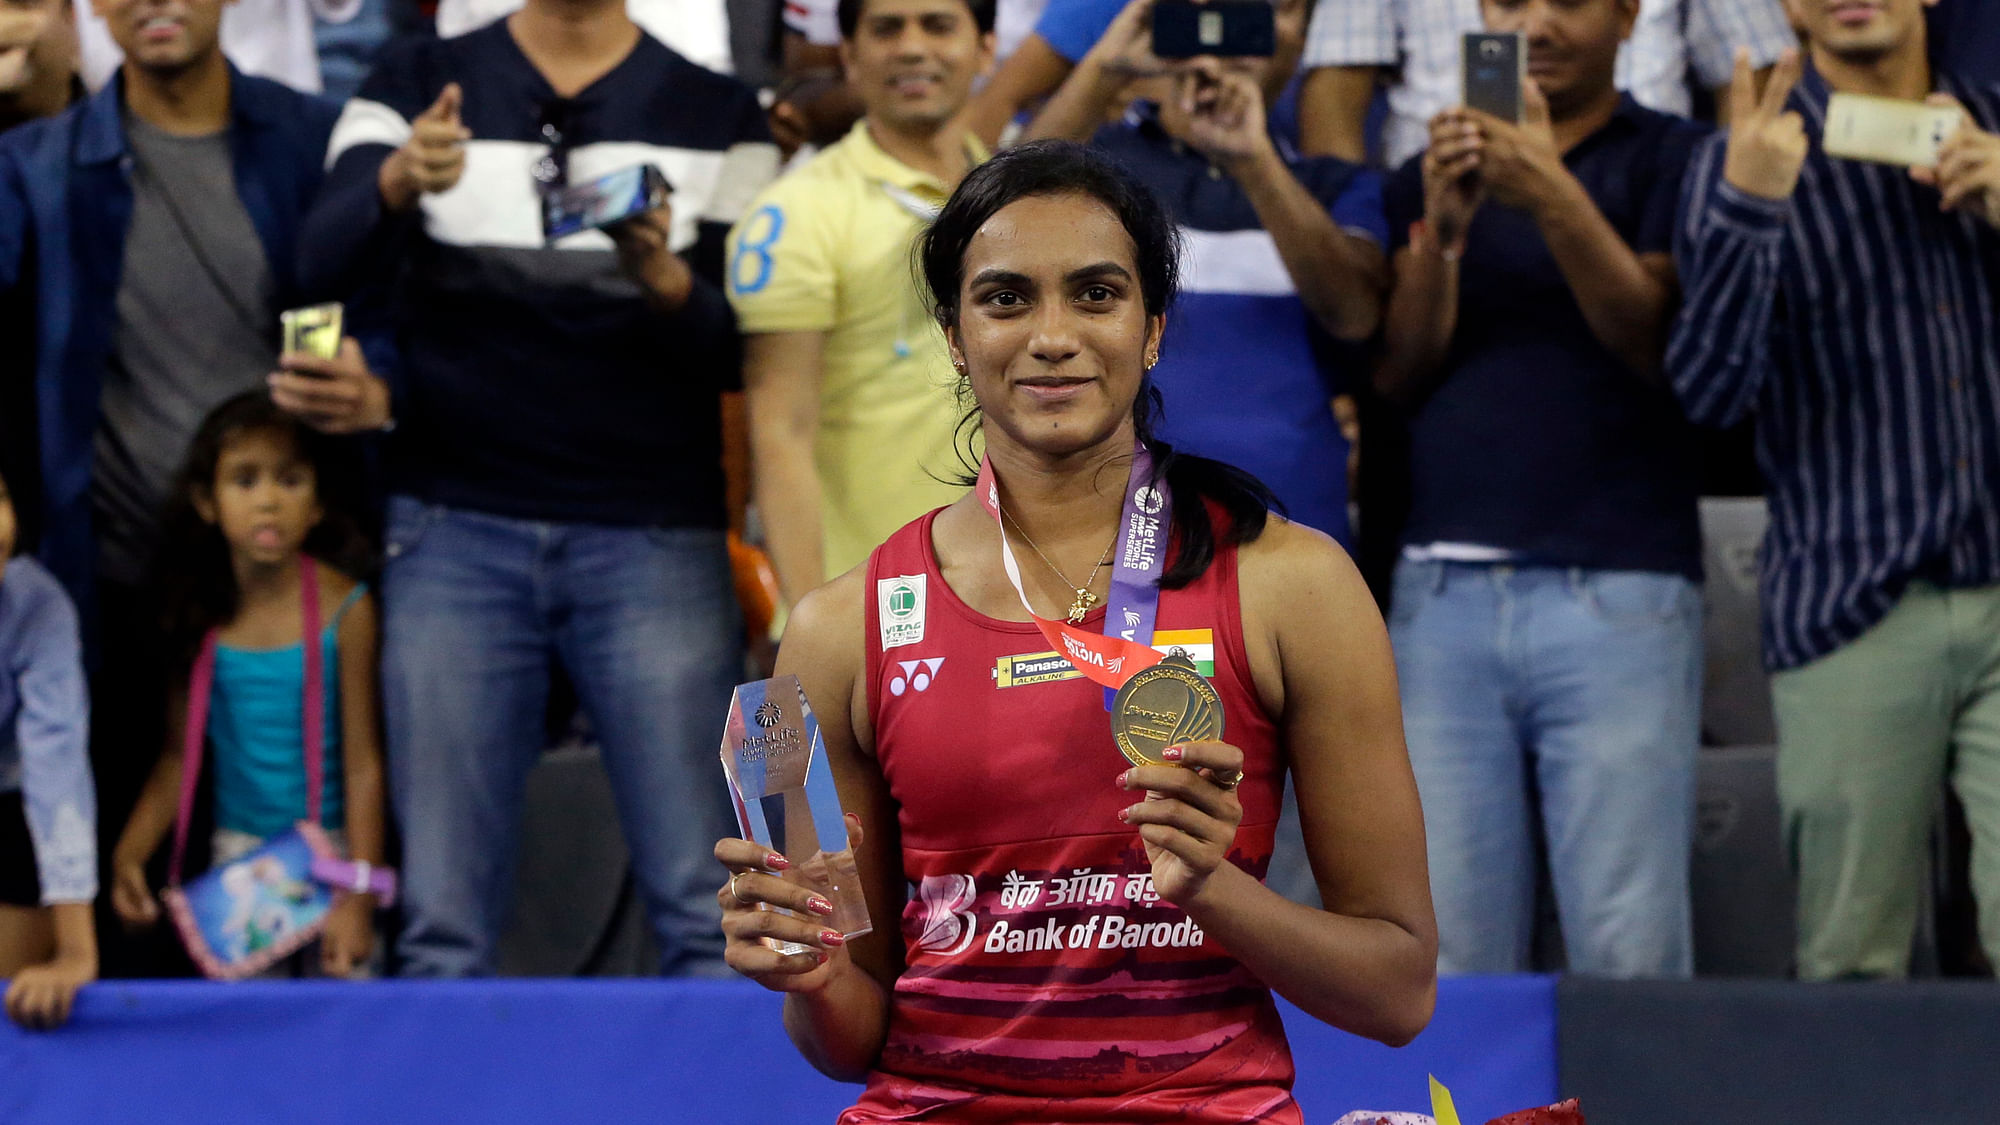 PV Sindhu poses with her gold medal and trophy during the awards ceremony after winning against Japan’s Nozomi Okuhara after the women’s single final at the Korea Open Badminton in Seoul.